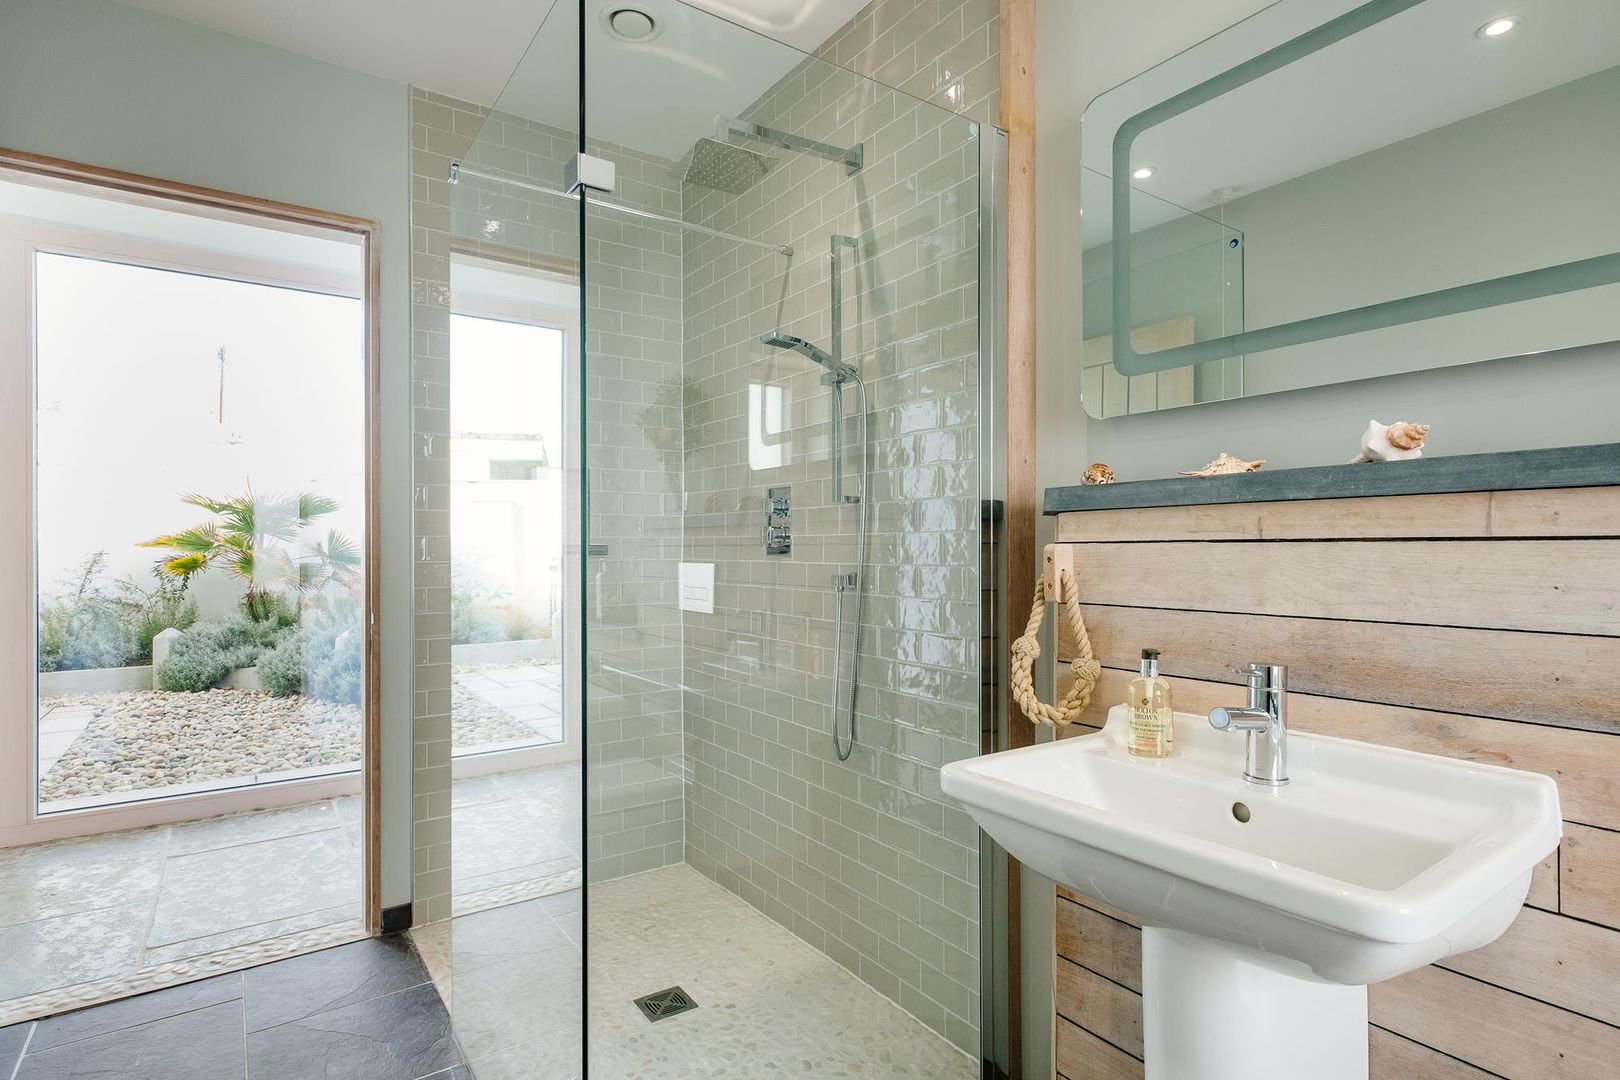 Treasure House, Polzeath | Cornwall, Perfect Stays Perfect Stays حمام walk-in shower,Glass screen,rustic wood,tiles,bathroom,wall hung,wet room,holiday home,beach home.